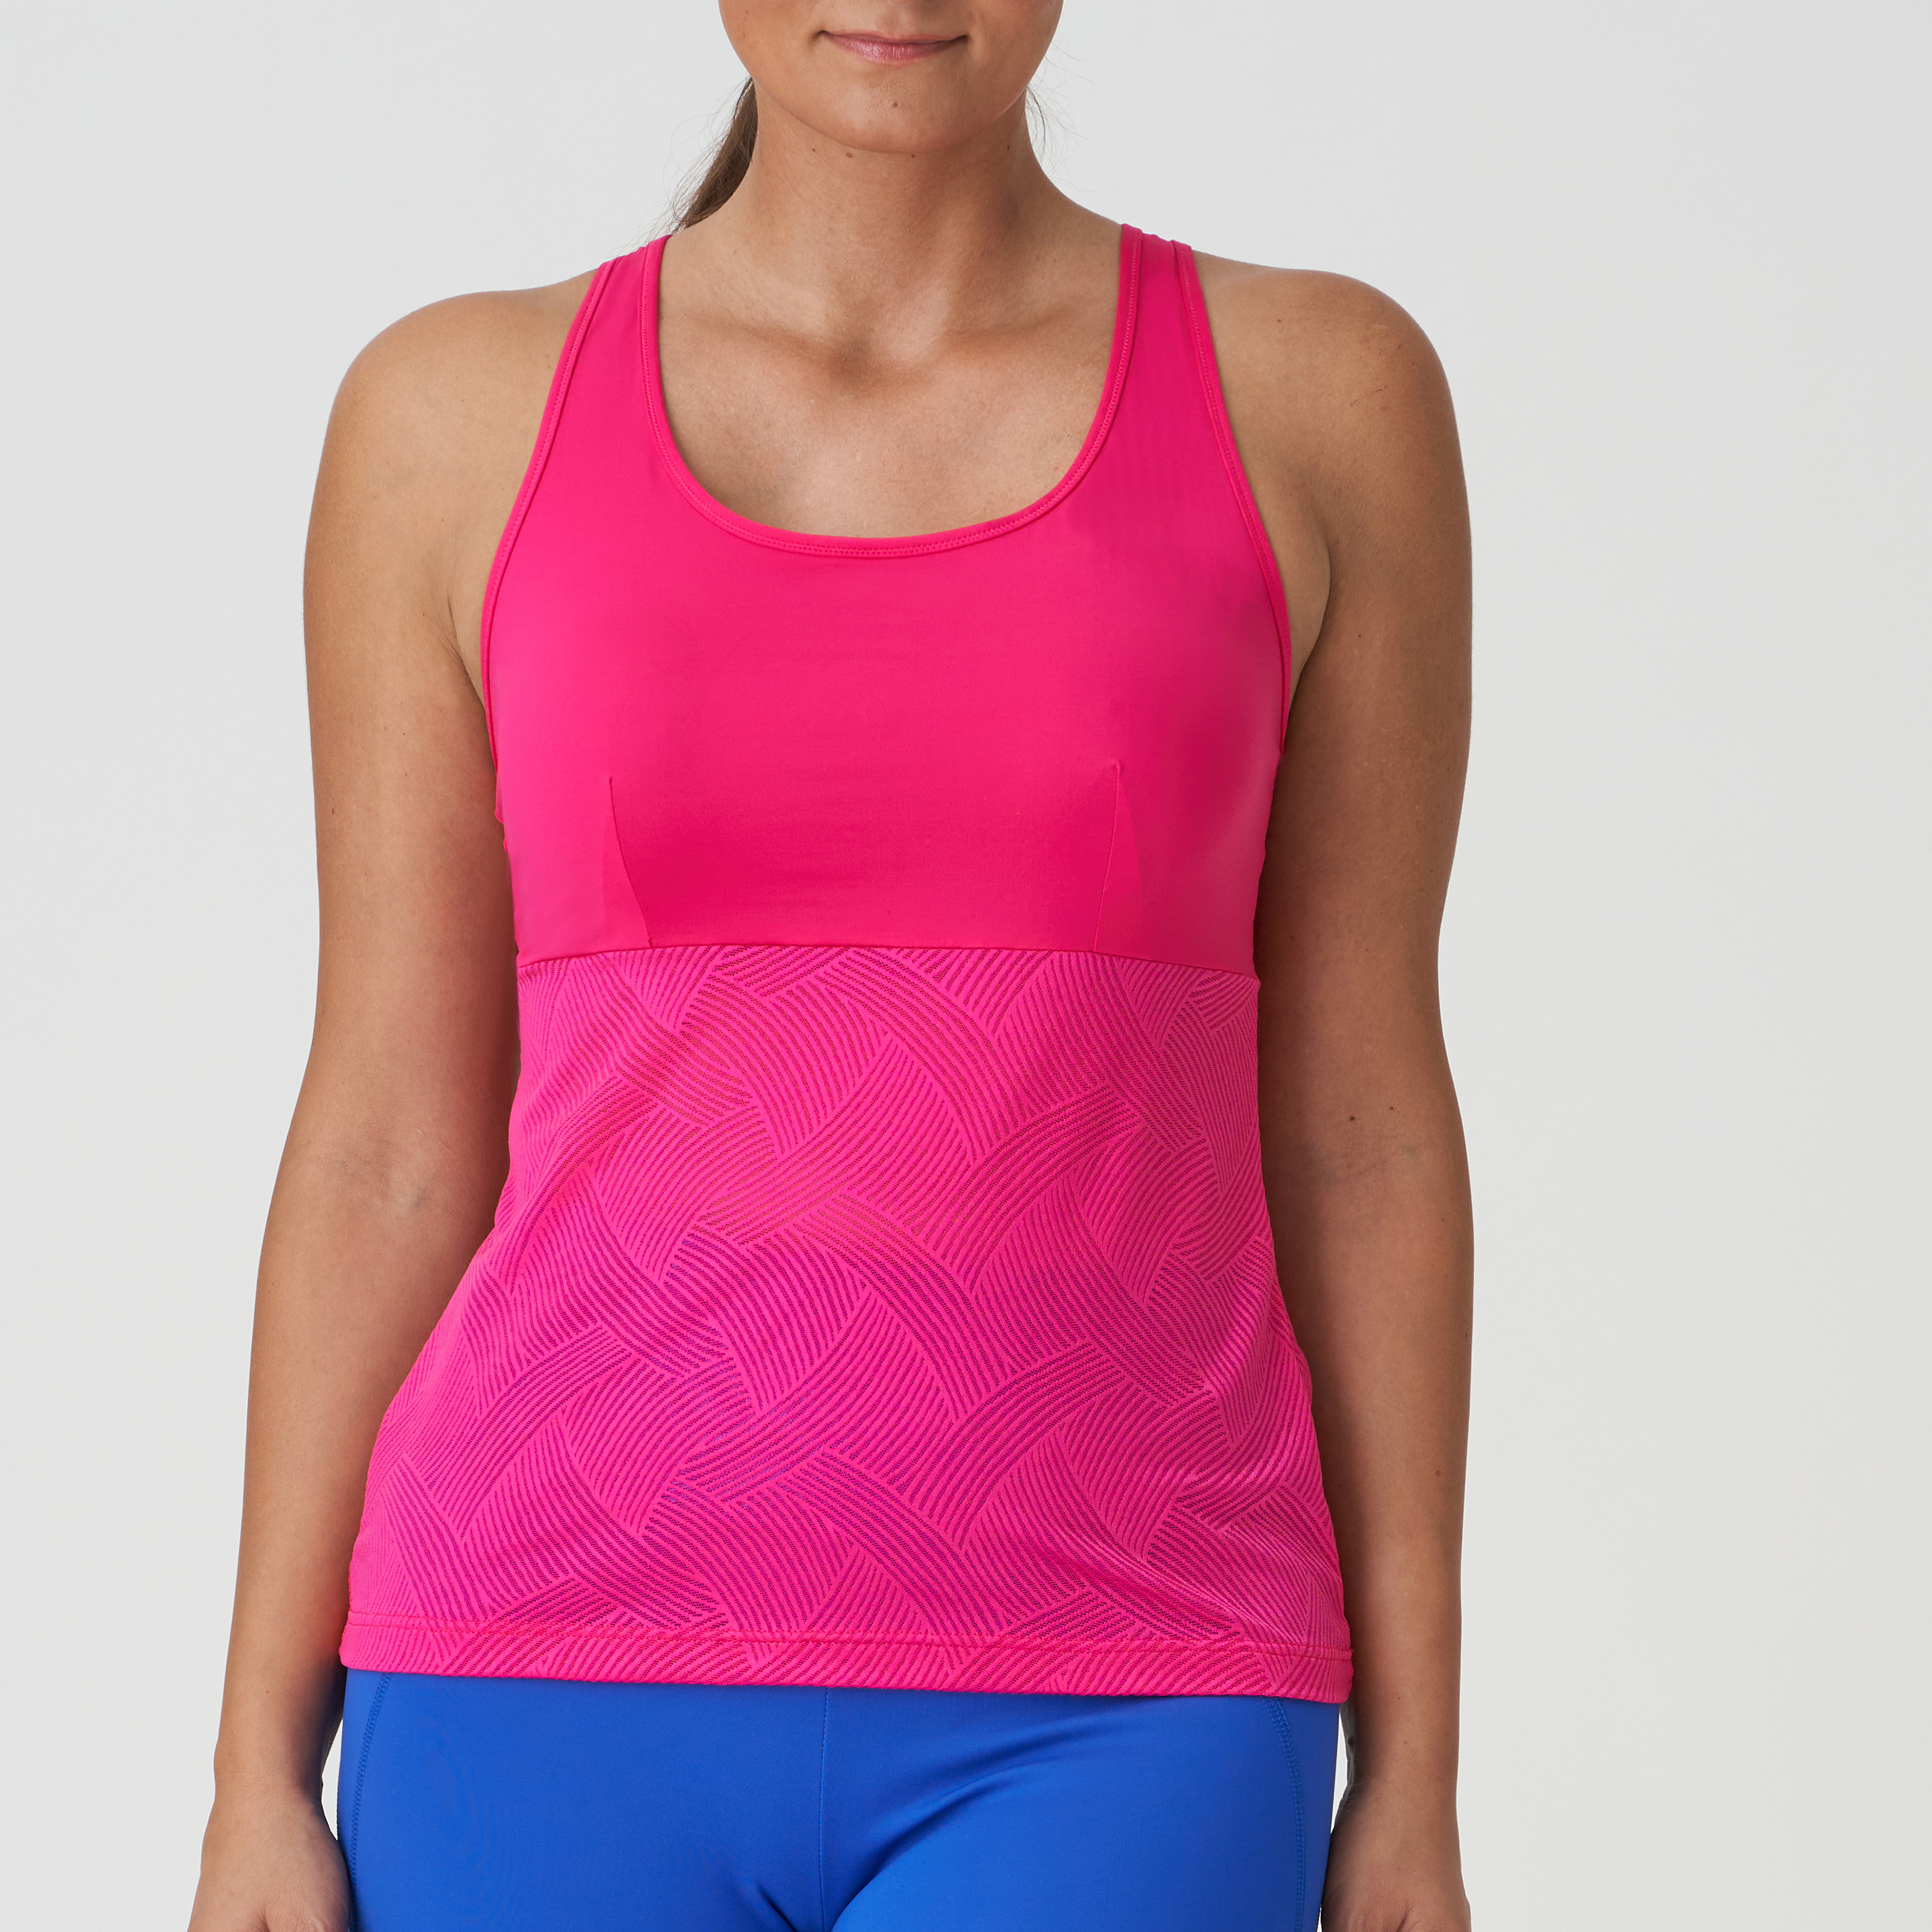 PrimaDonna Sport THE GAME Electric Pink tank top